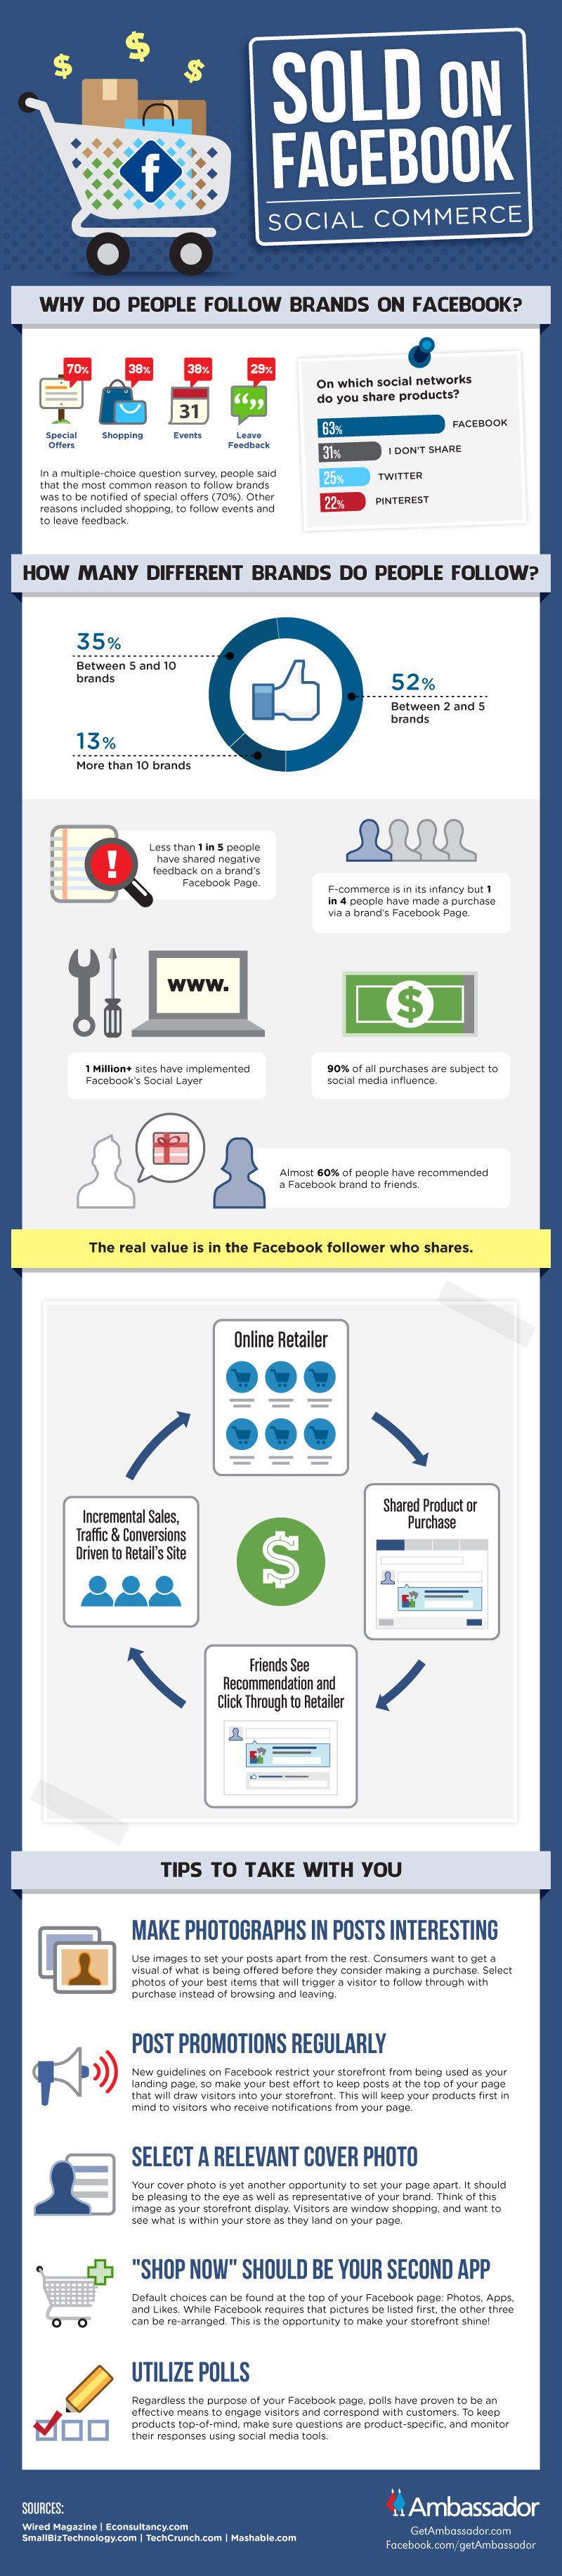 Social commerce infographic